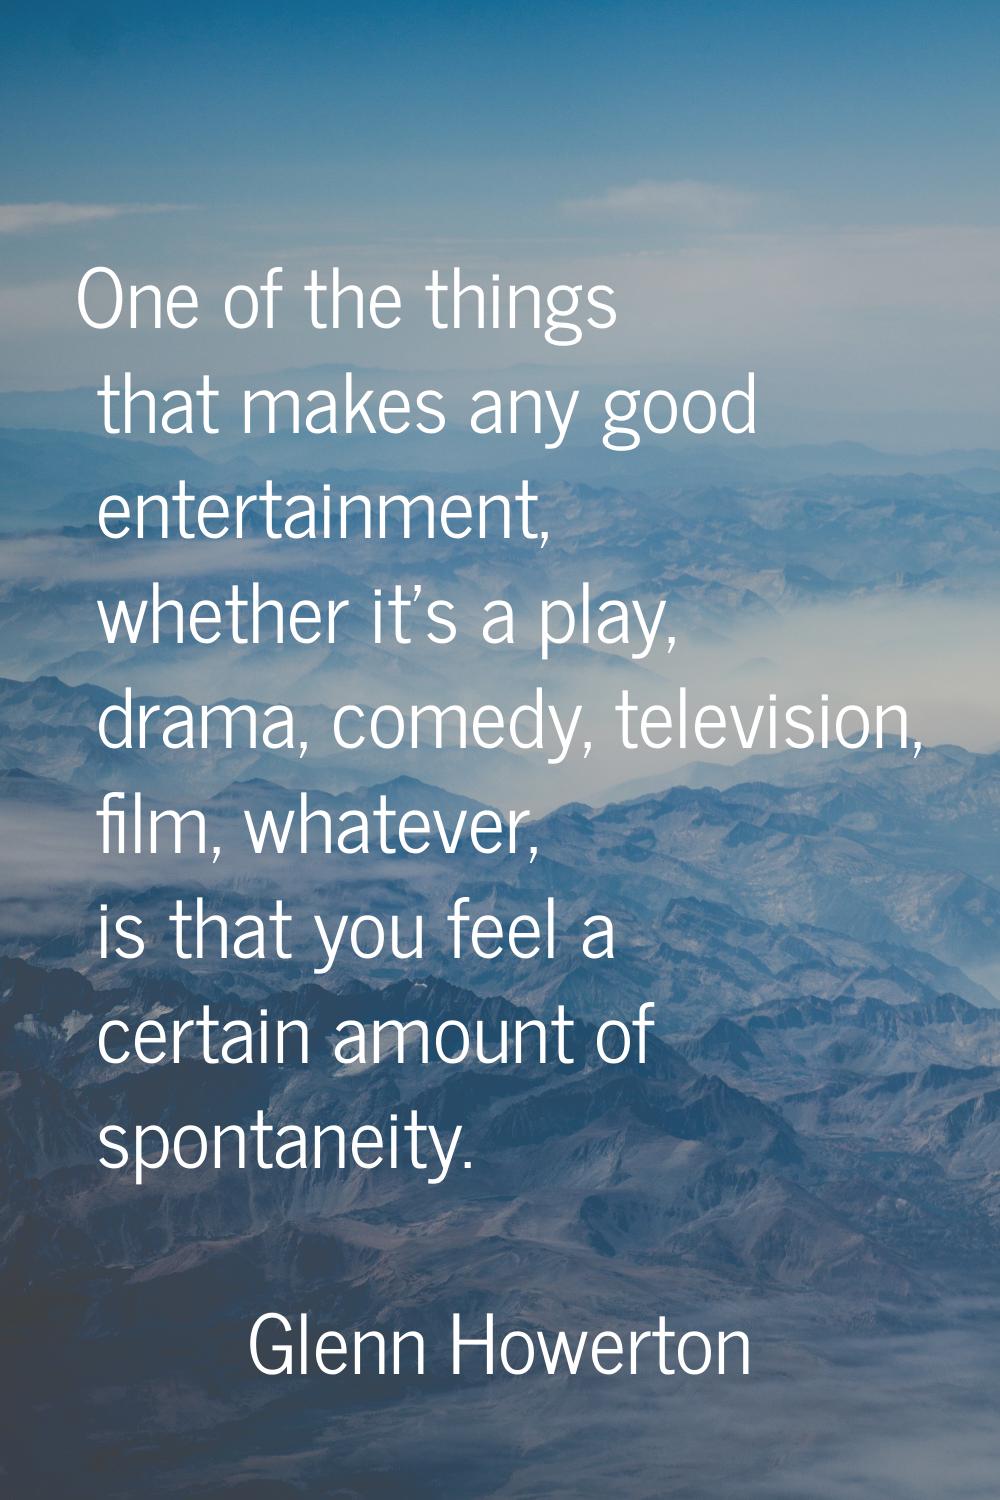 One of the things that makes any good entertainment, whether it's a play, drama, comedy, television